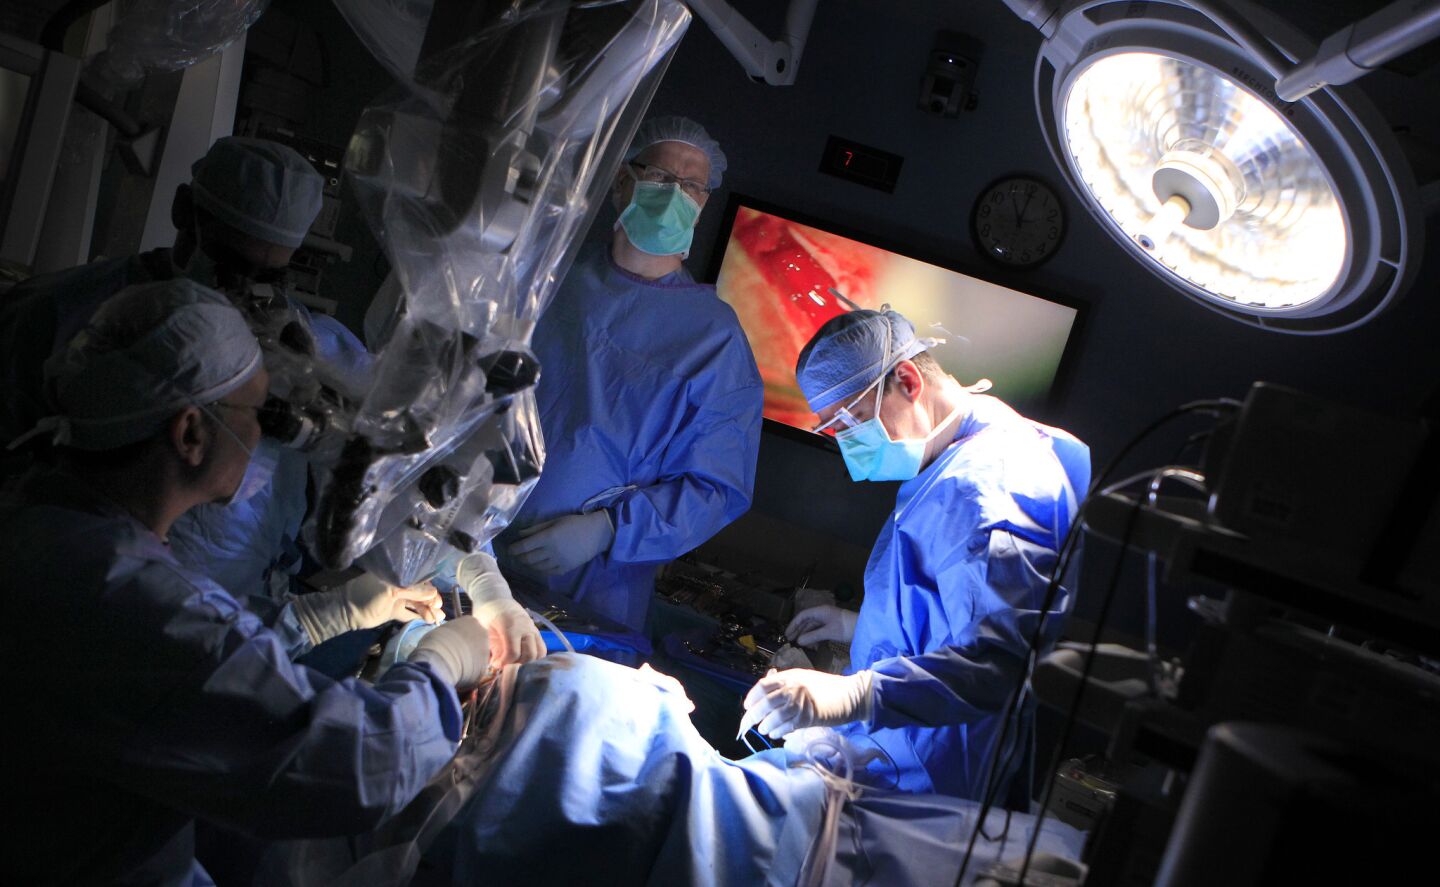 Surgeons and medical staff during Auguste Majkowski's auditory brainstem operation at Children's Hospital Los Angeles.